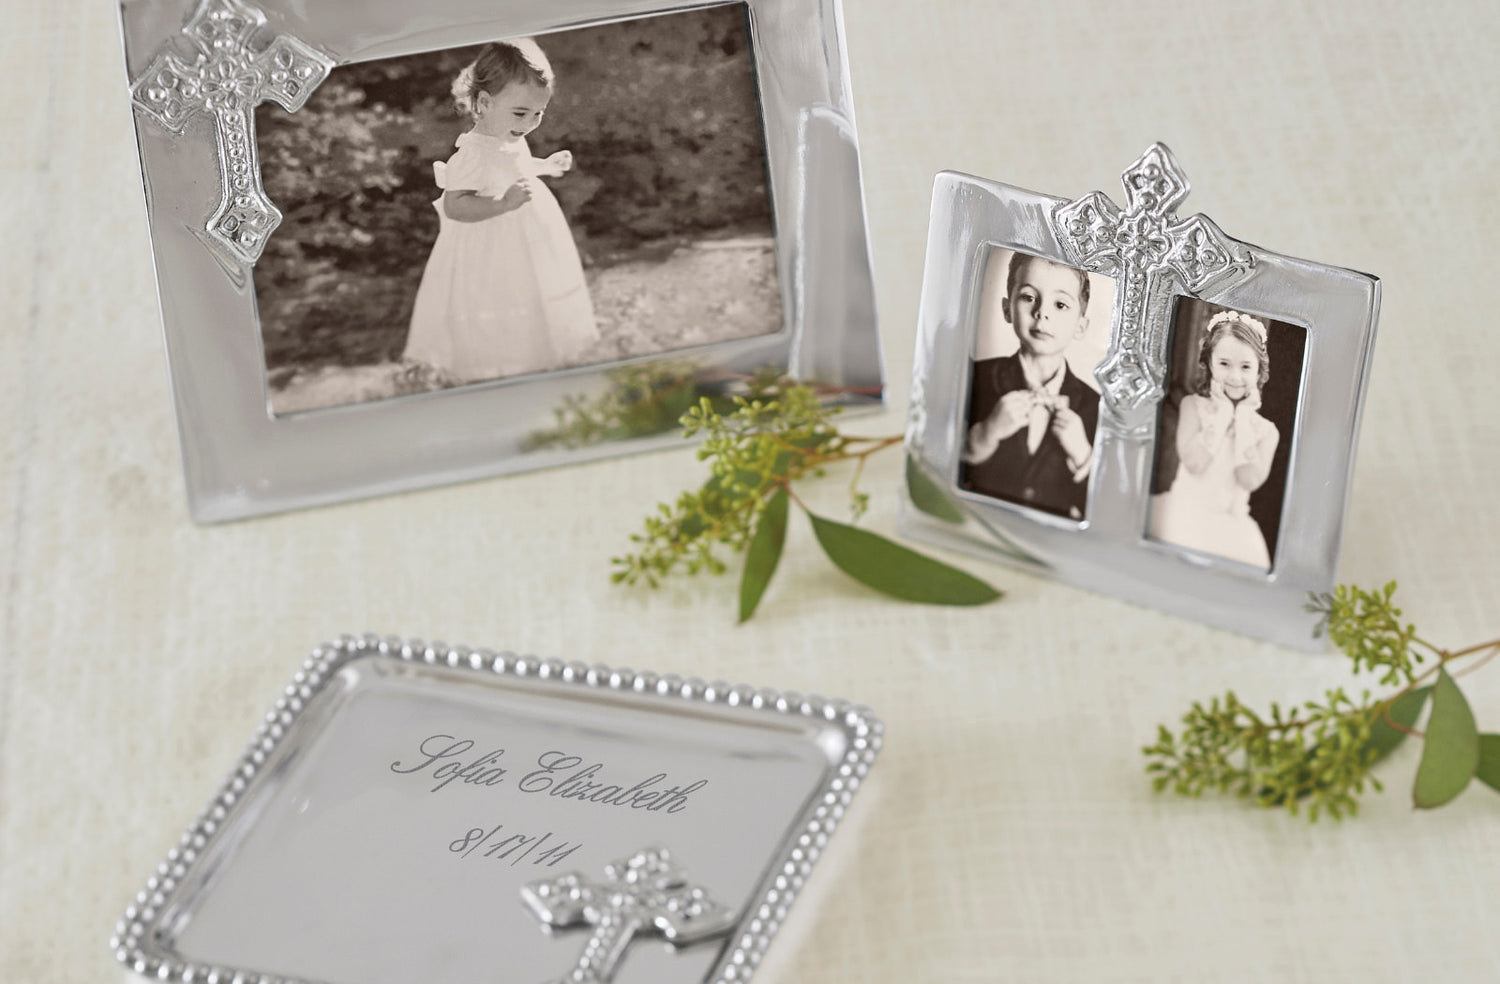 Christening gifts - silver cross picture frames, silver cross tray